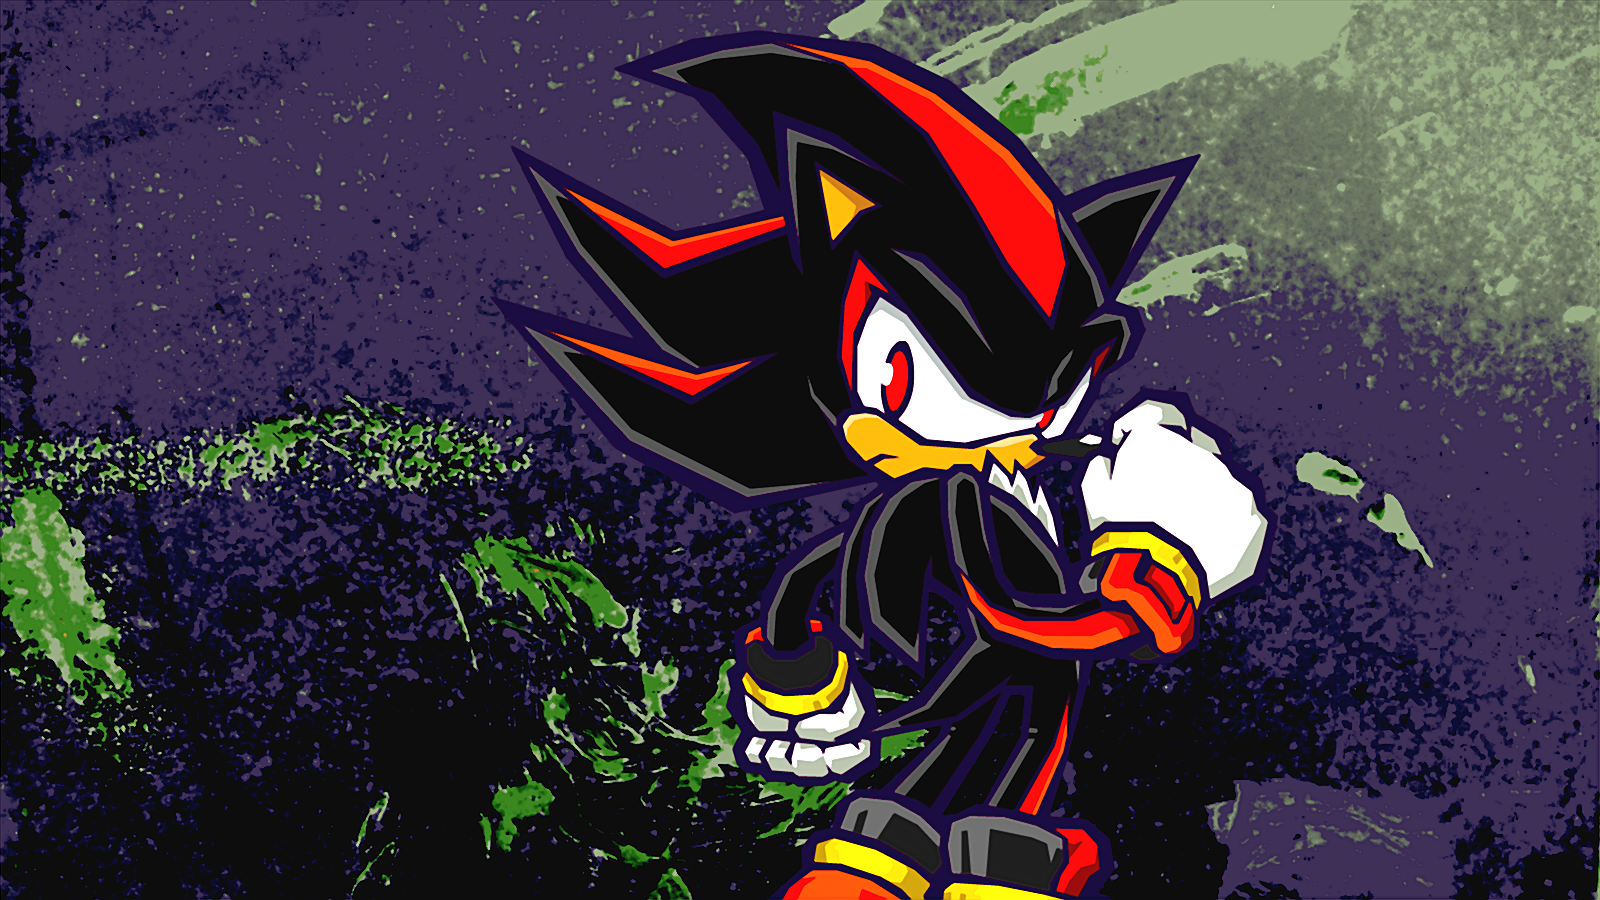 Shadow the Hedgehog from Sonic Boom by Light-Rock by Light-Rock